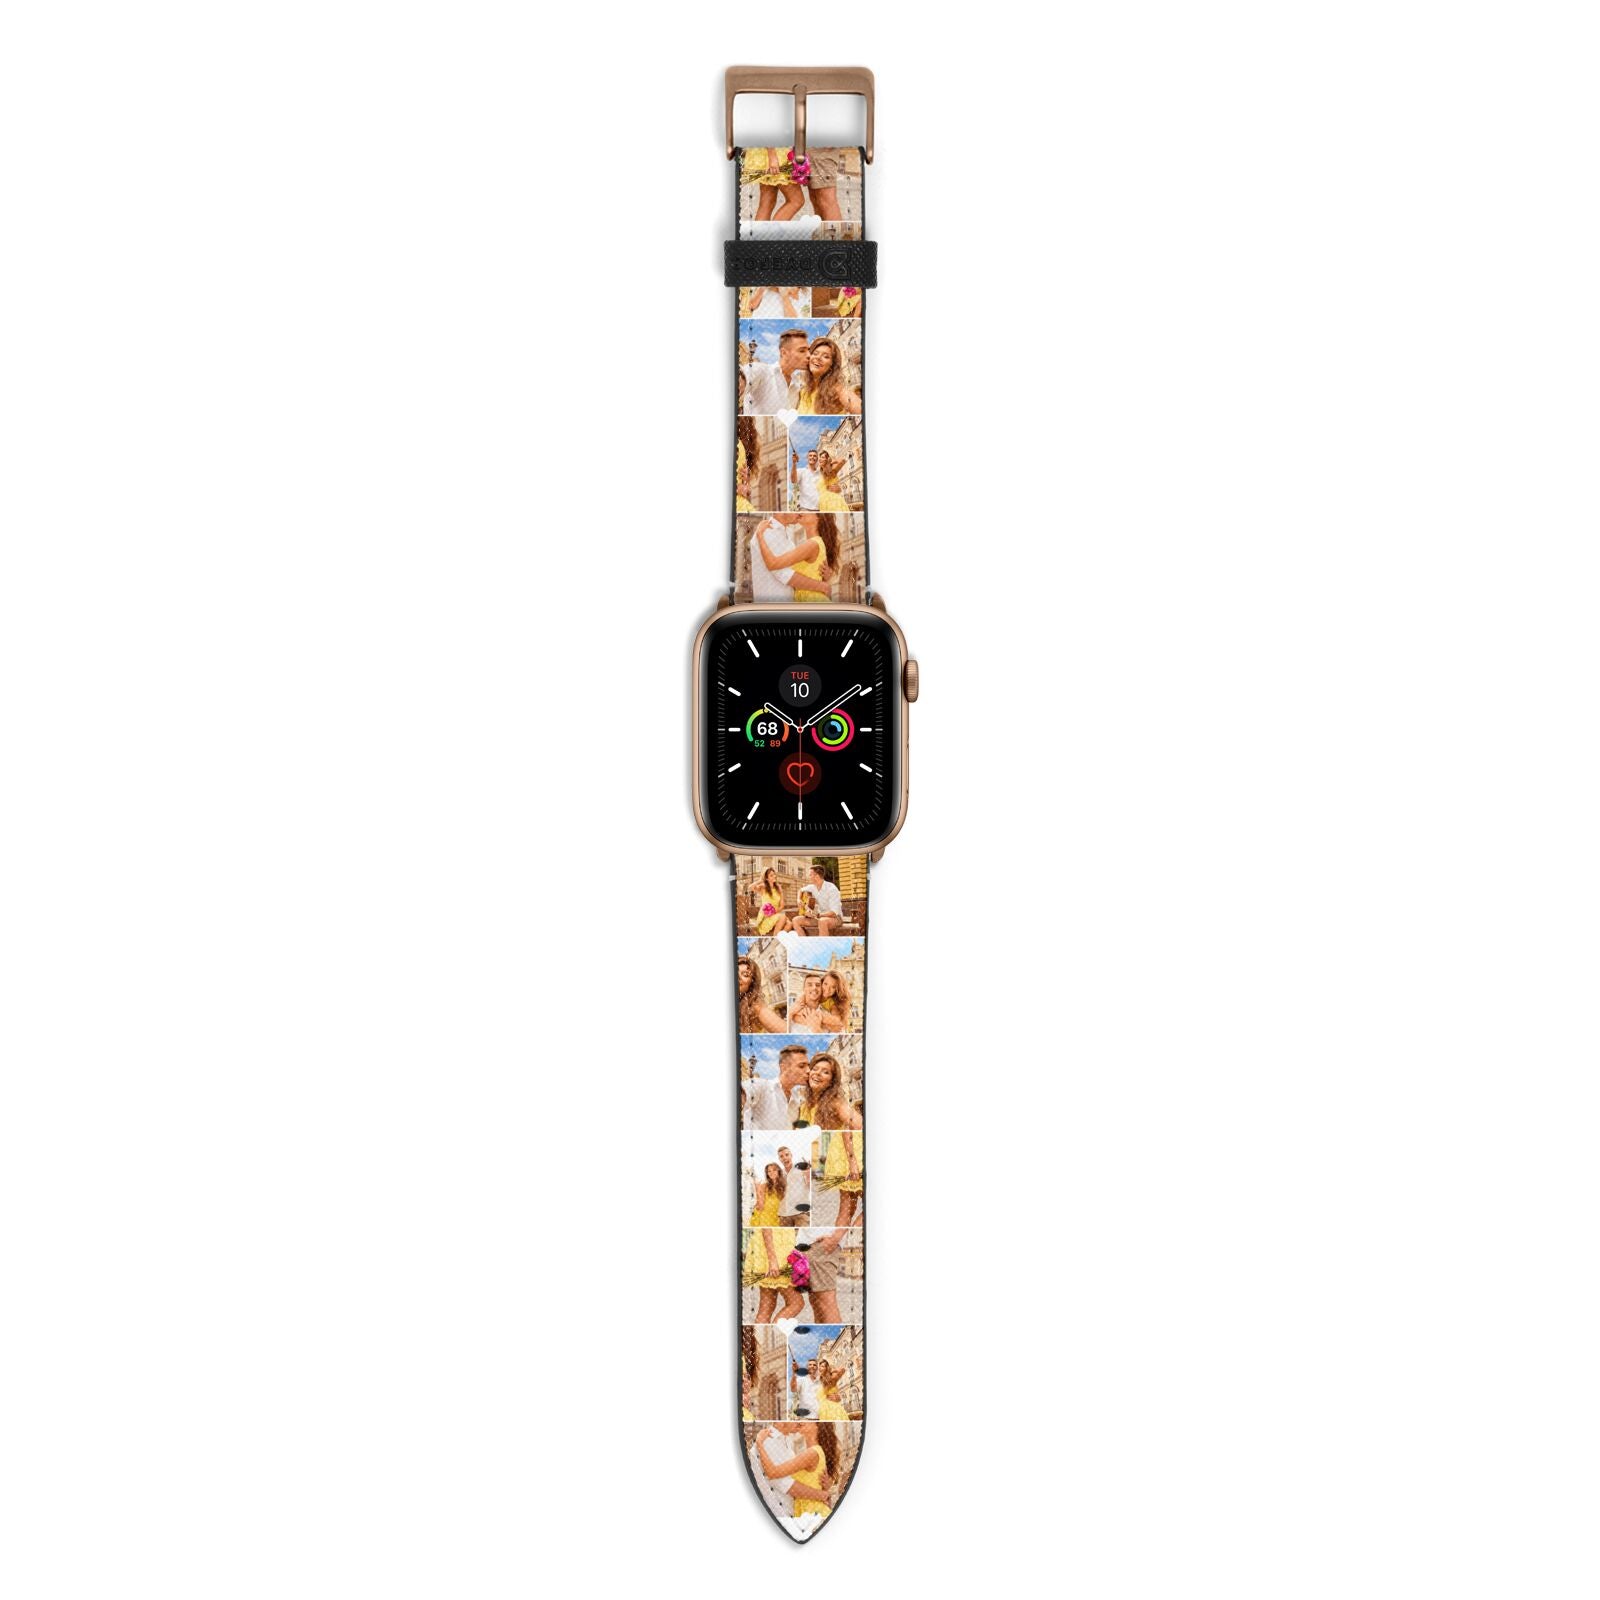 Photo Collage Heart Apple Watch Strap with Gold Hardware